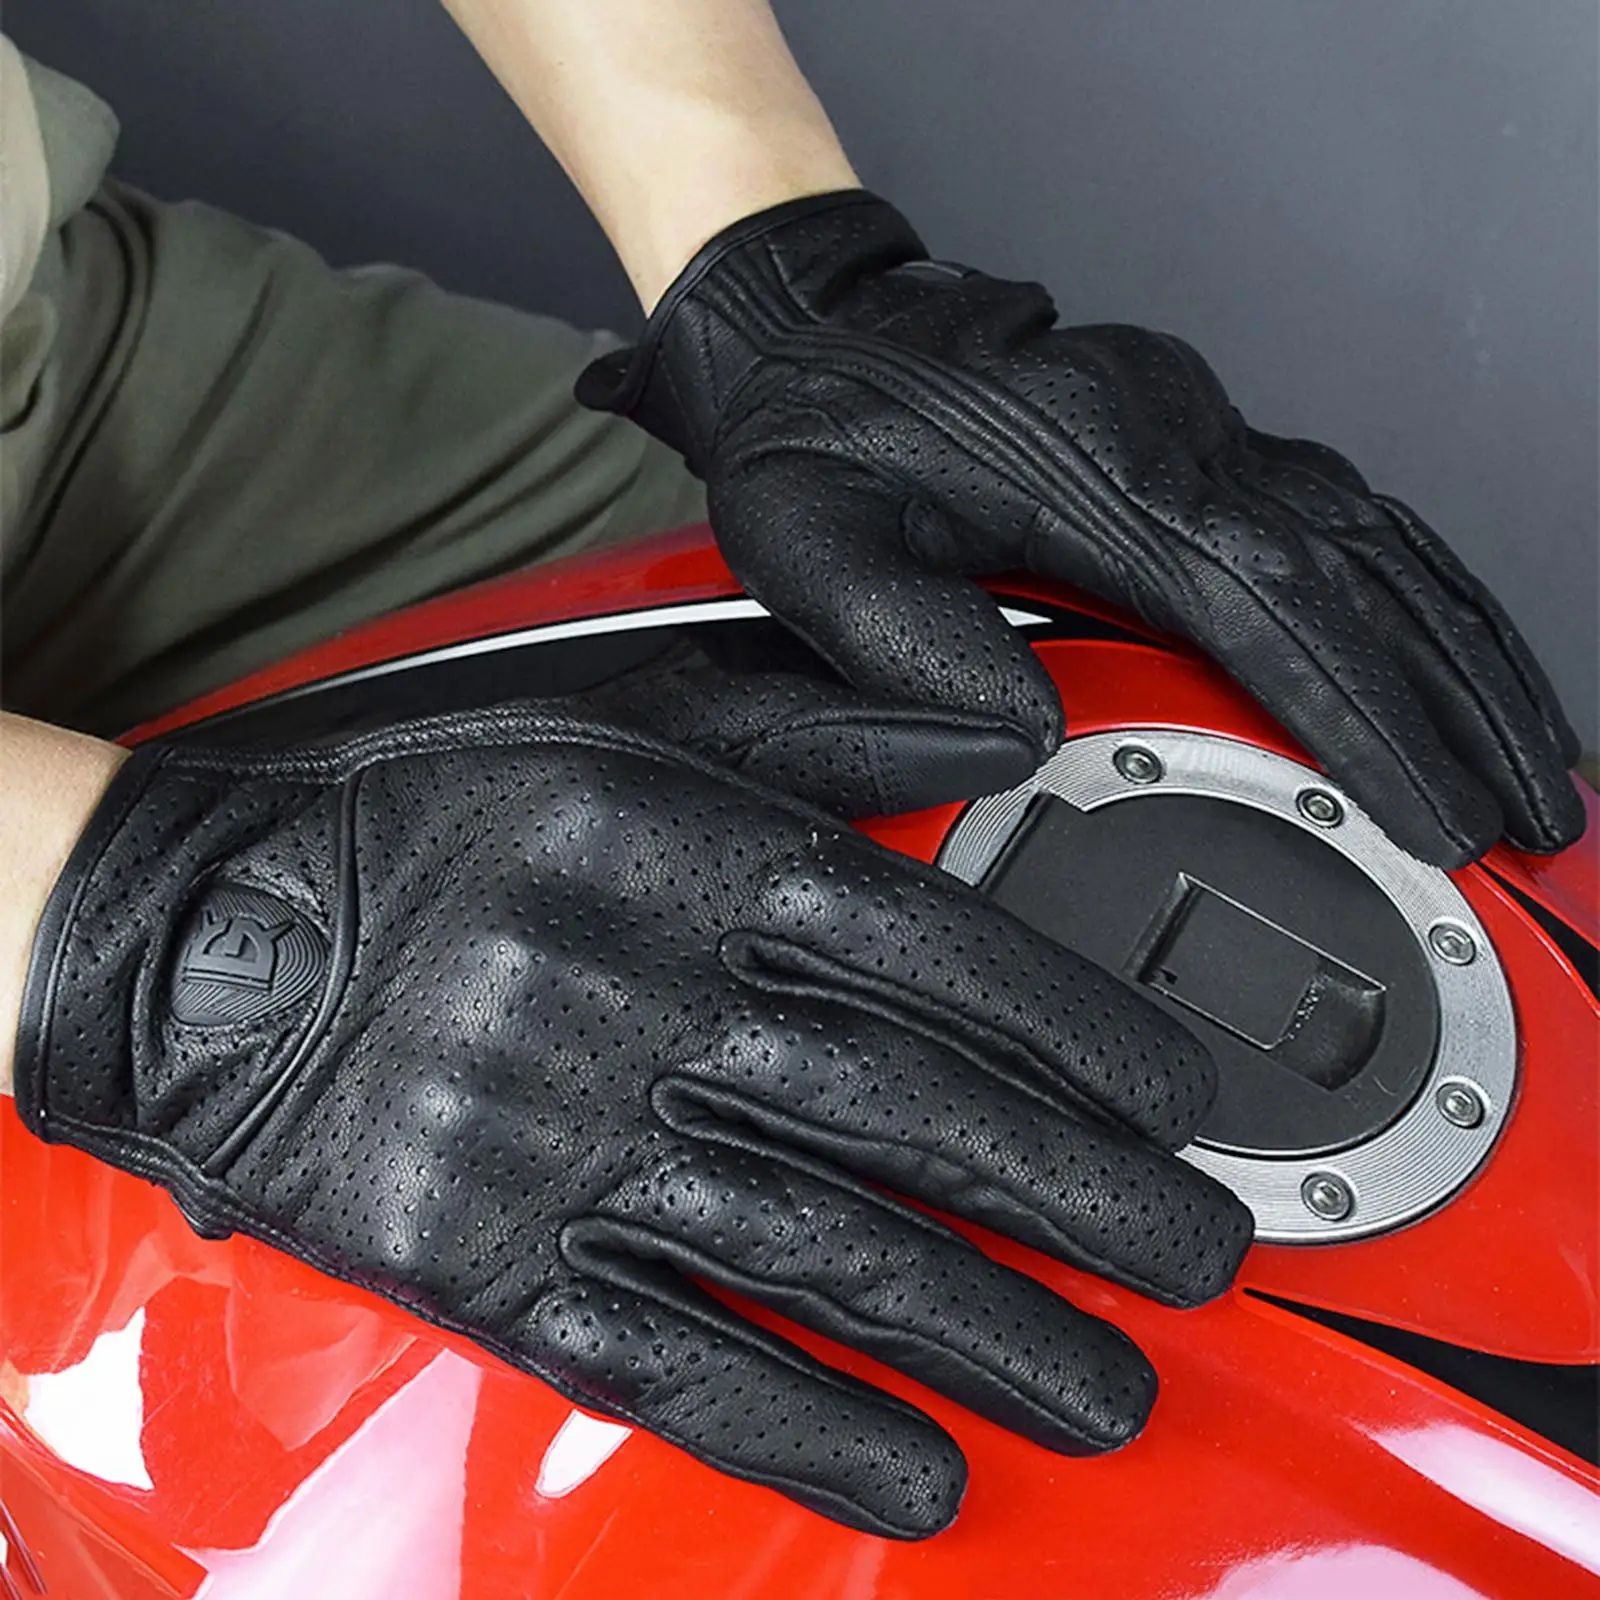 Quality Goatskin Leather Motorcycle motor  Gloves Touchscreen for Men and Women Black